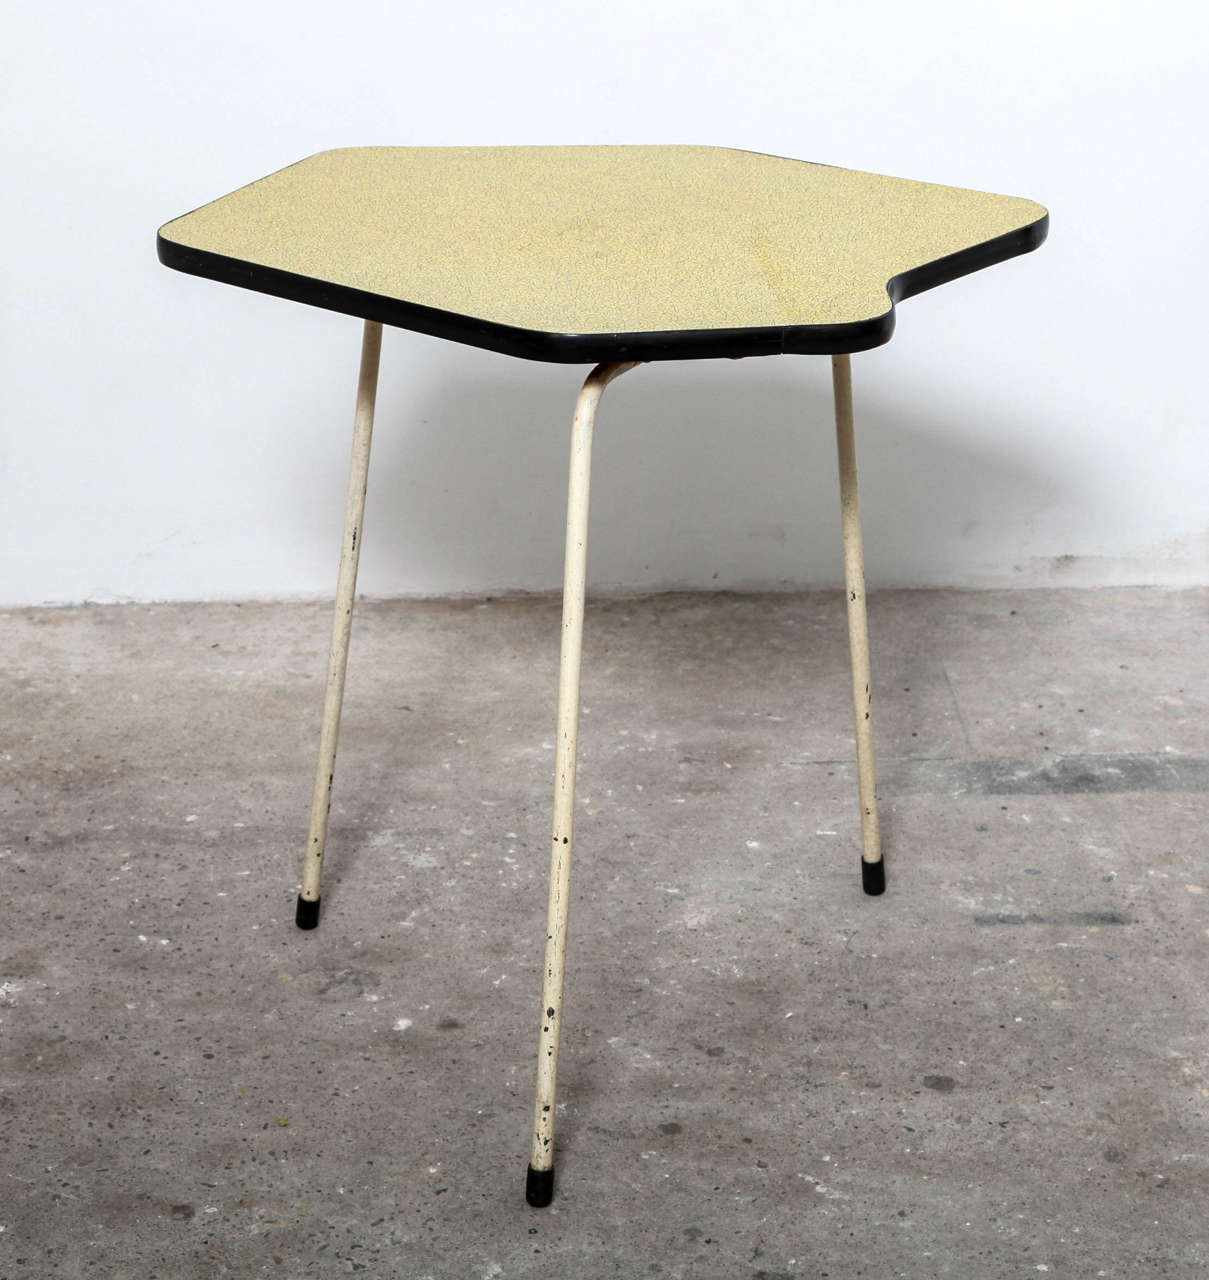 Very nice piece of Belgium Industrial Design. A rare side table designed for Tubax in 1950s. The table has a very nice decorated top and are based on three heavy white lacquered solid metal legs. Collectors item in original vintage condition.